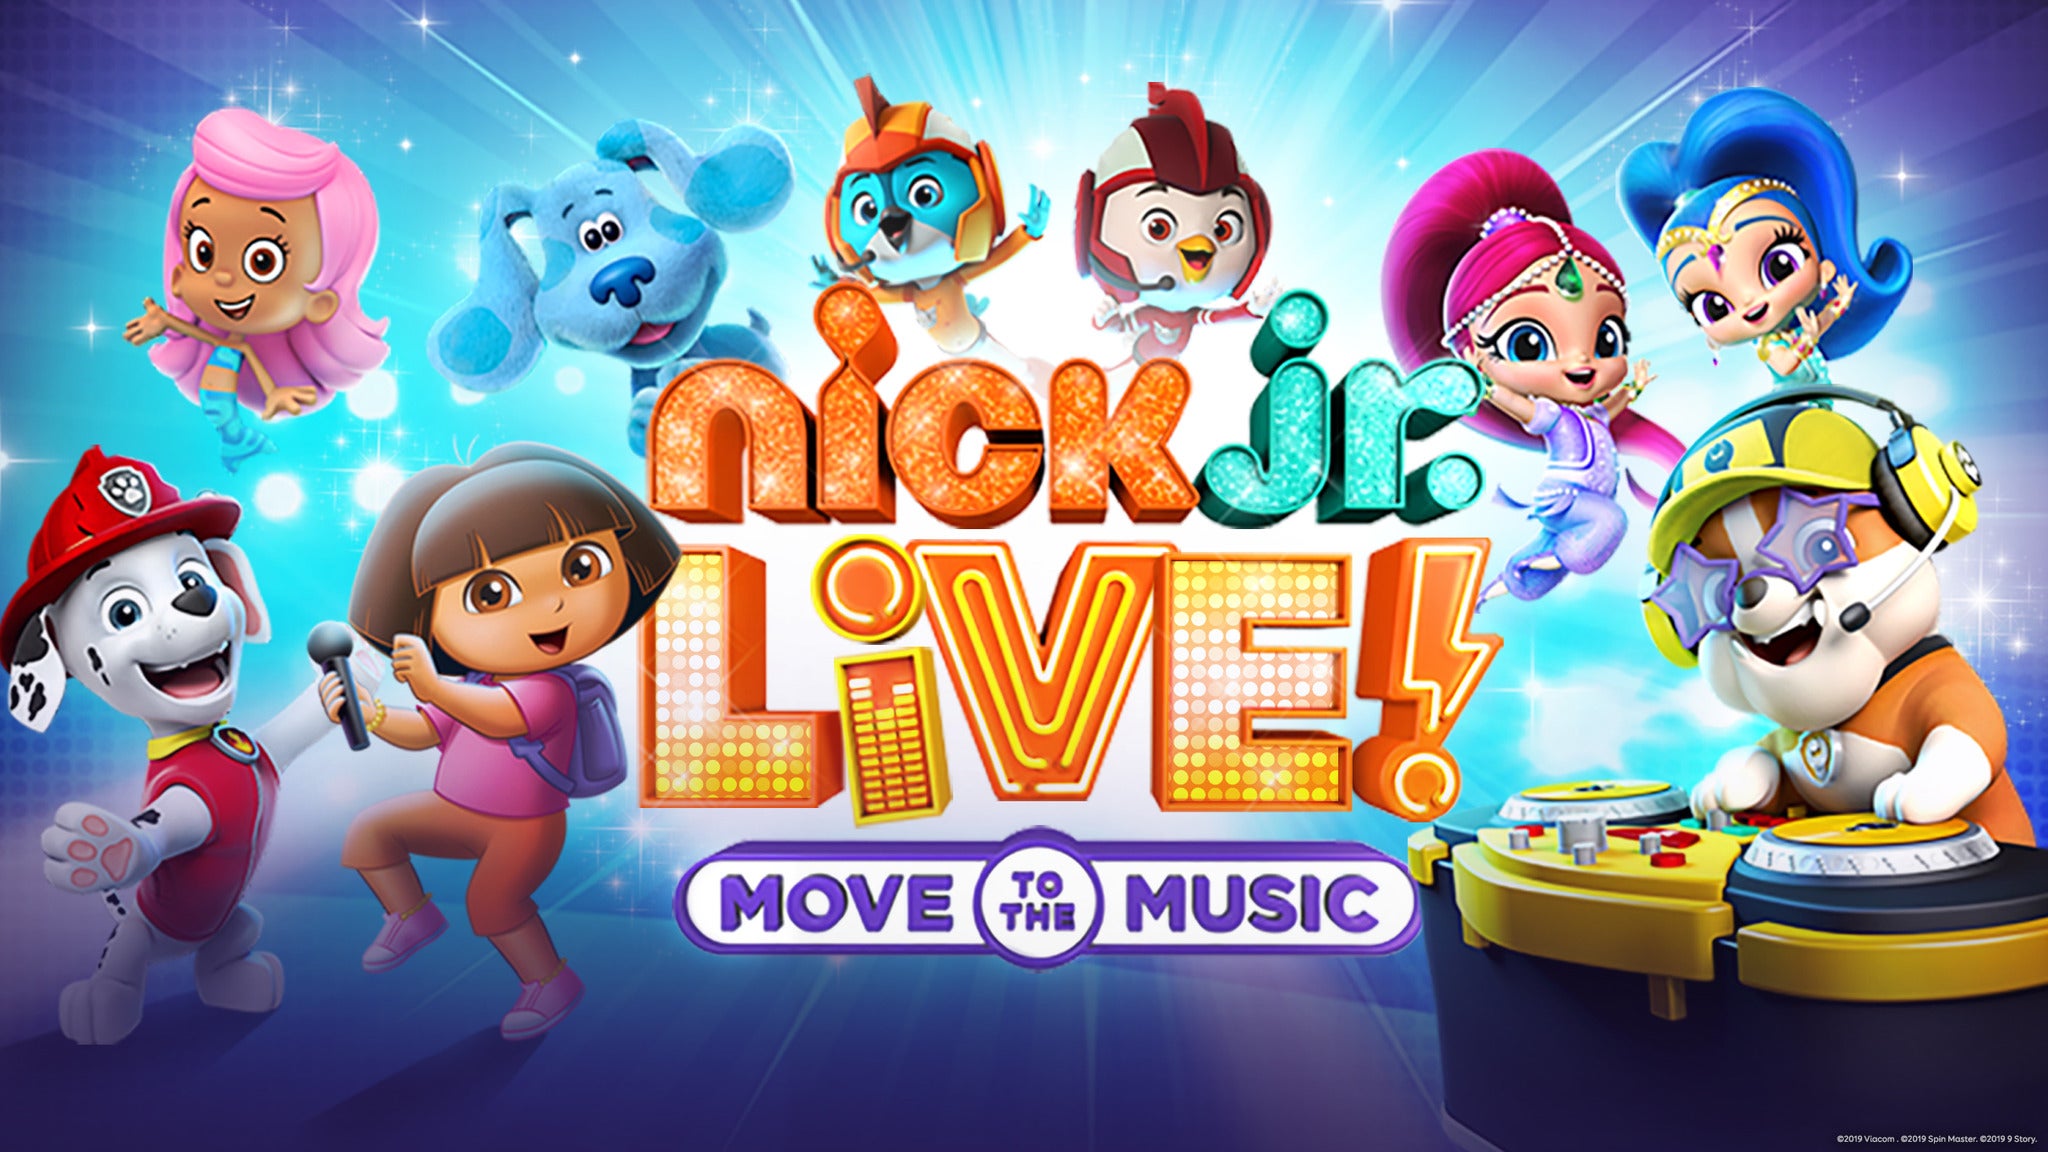 Nick Jr. Live! Move to the Music in San Jose promo photo for Ticketmaster presale offer code